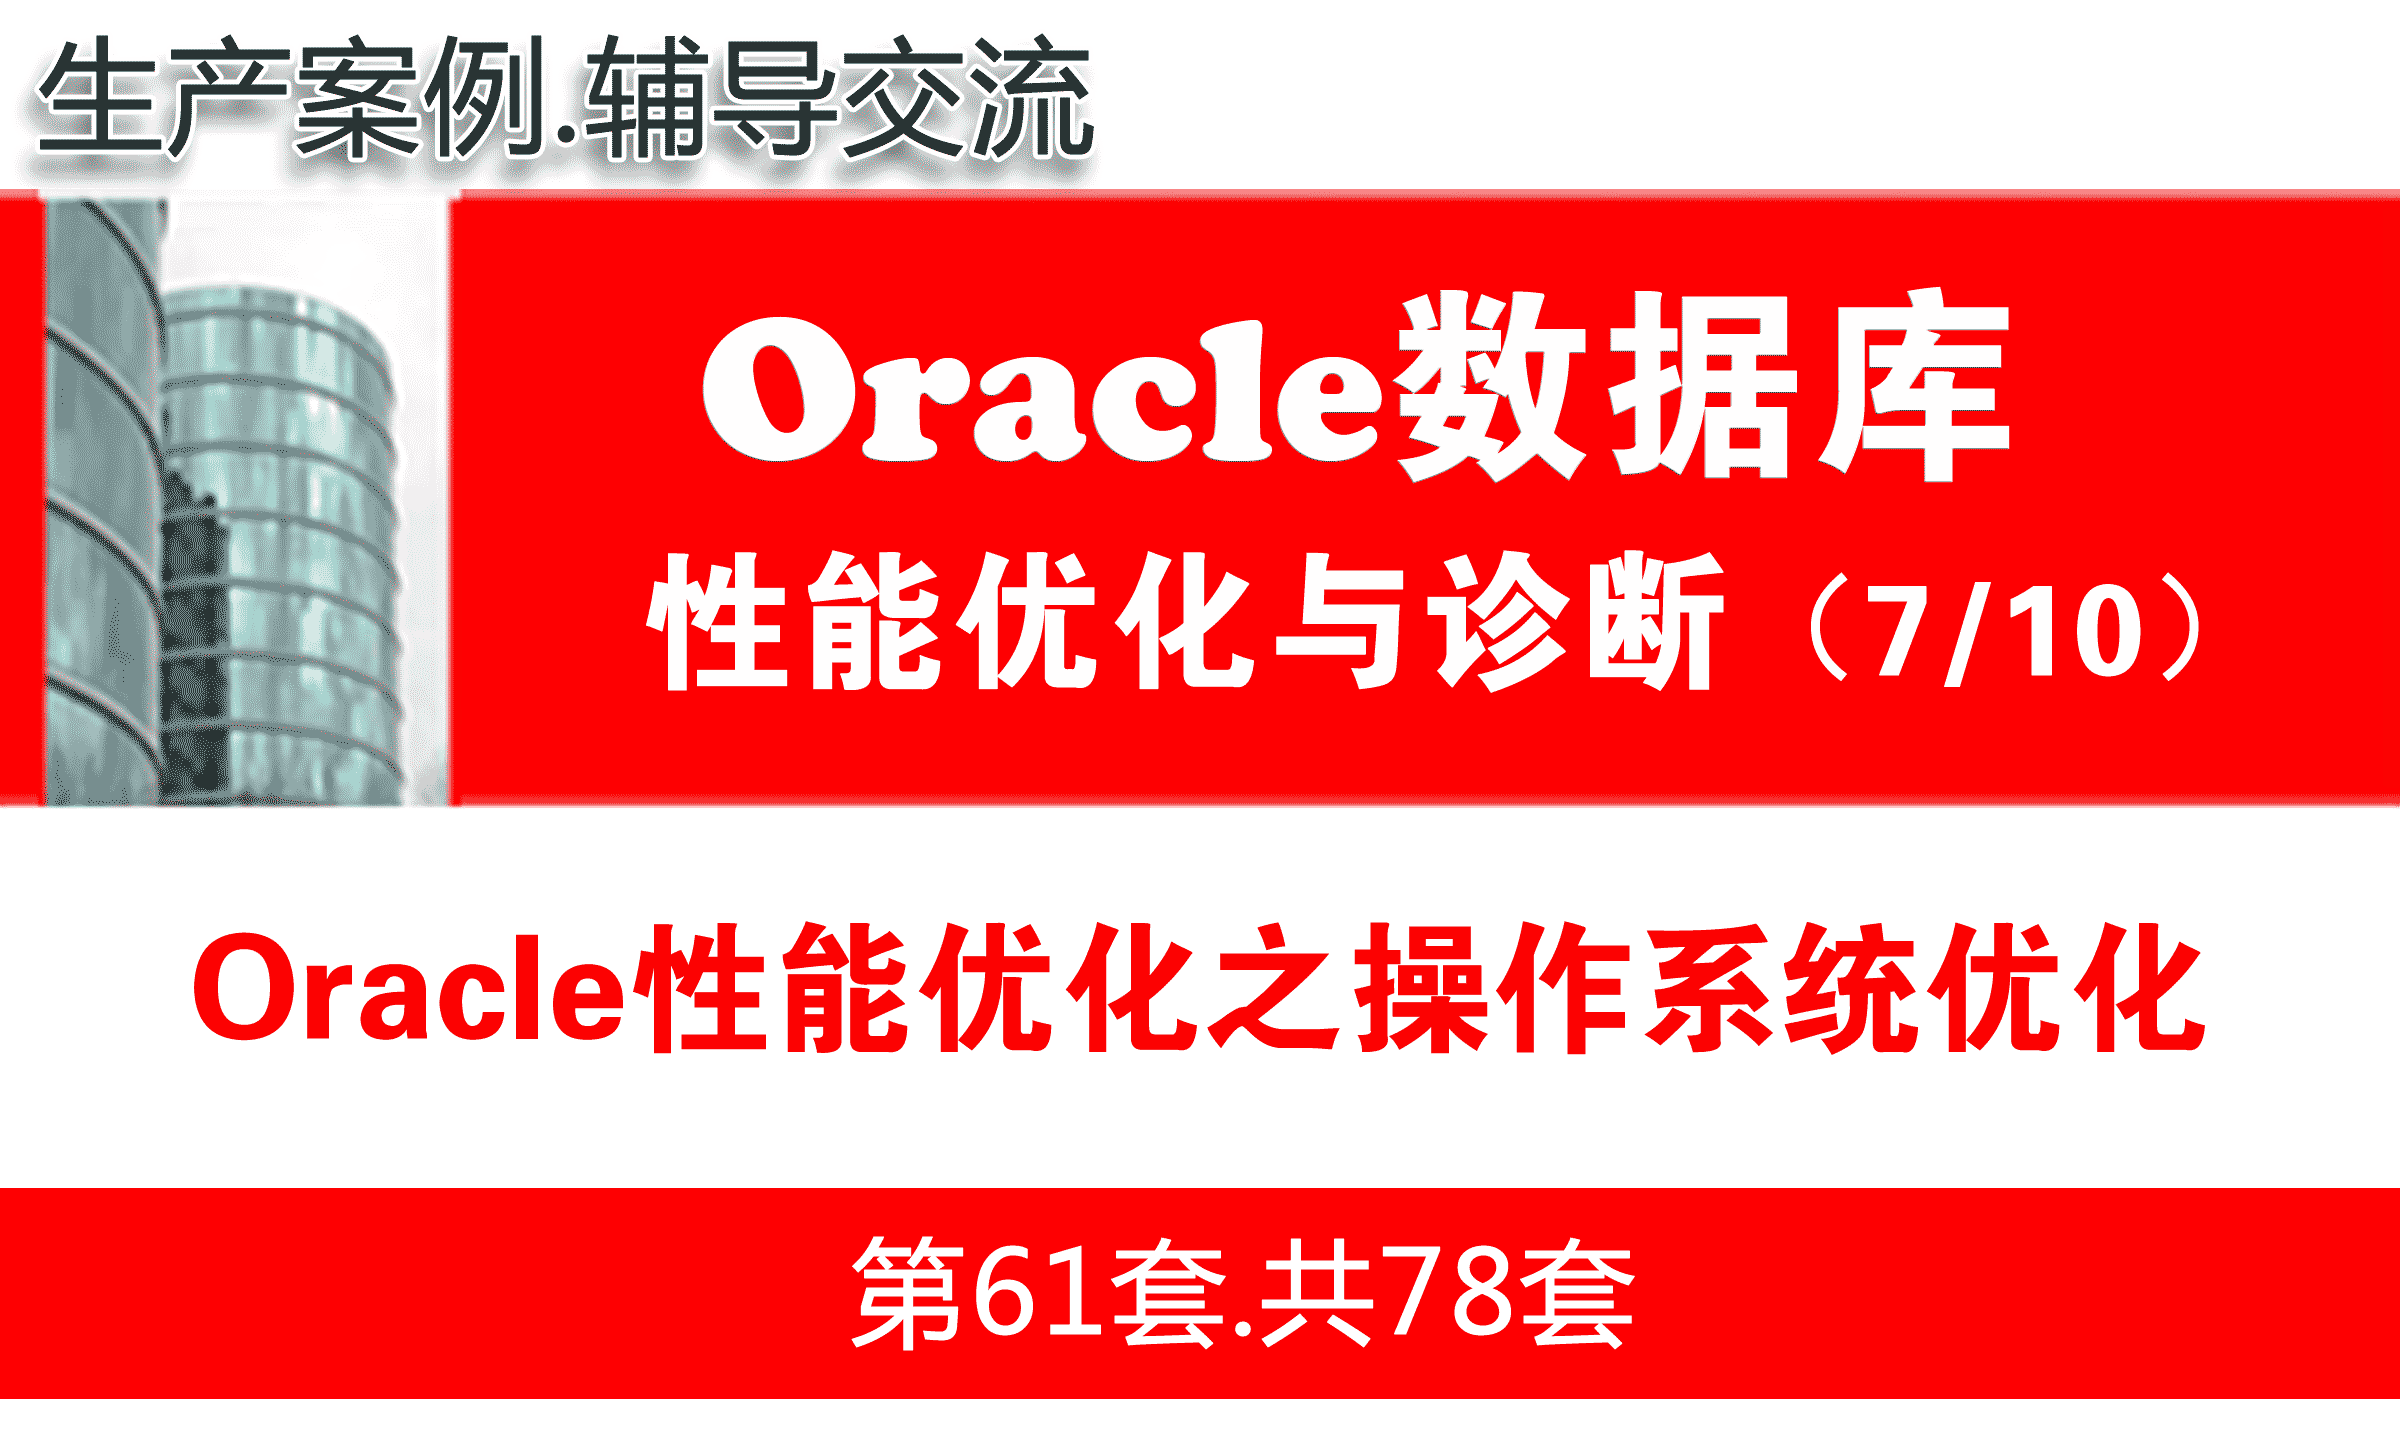 Oracle性能优化之Linux操作系统优化_Oracle性能优化与故障诊断教程07